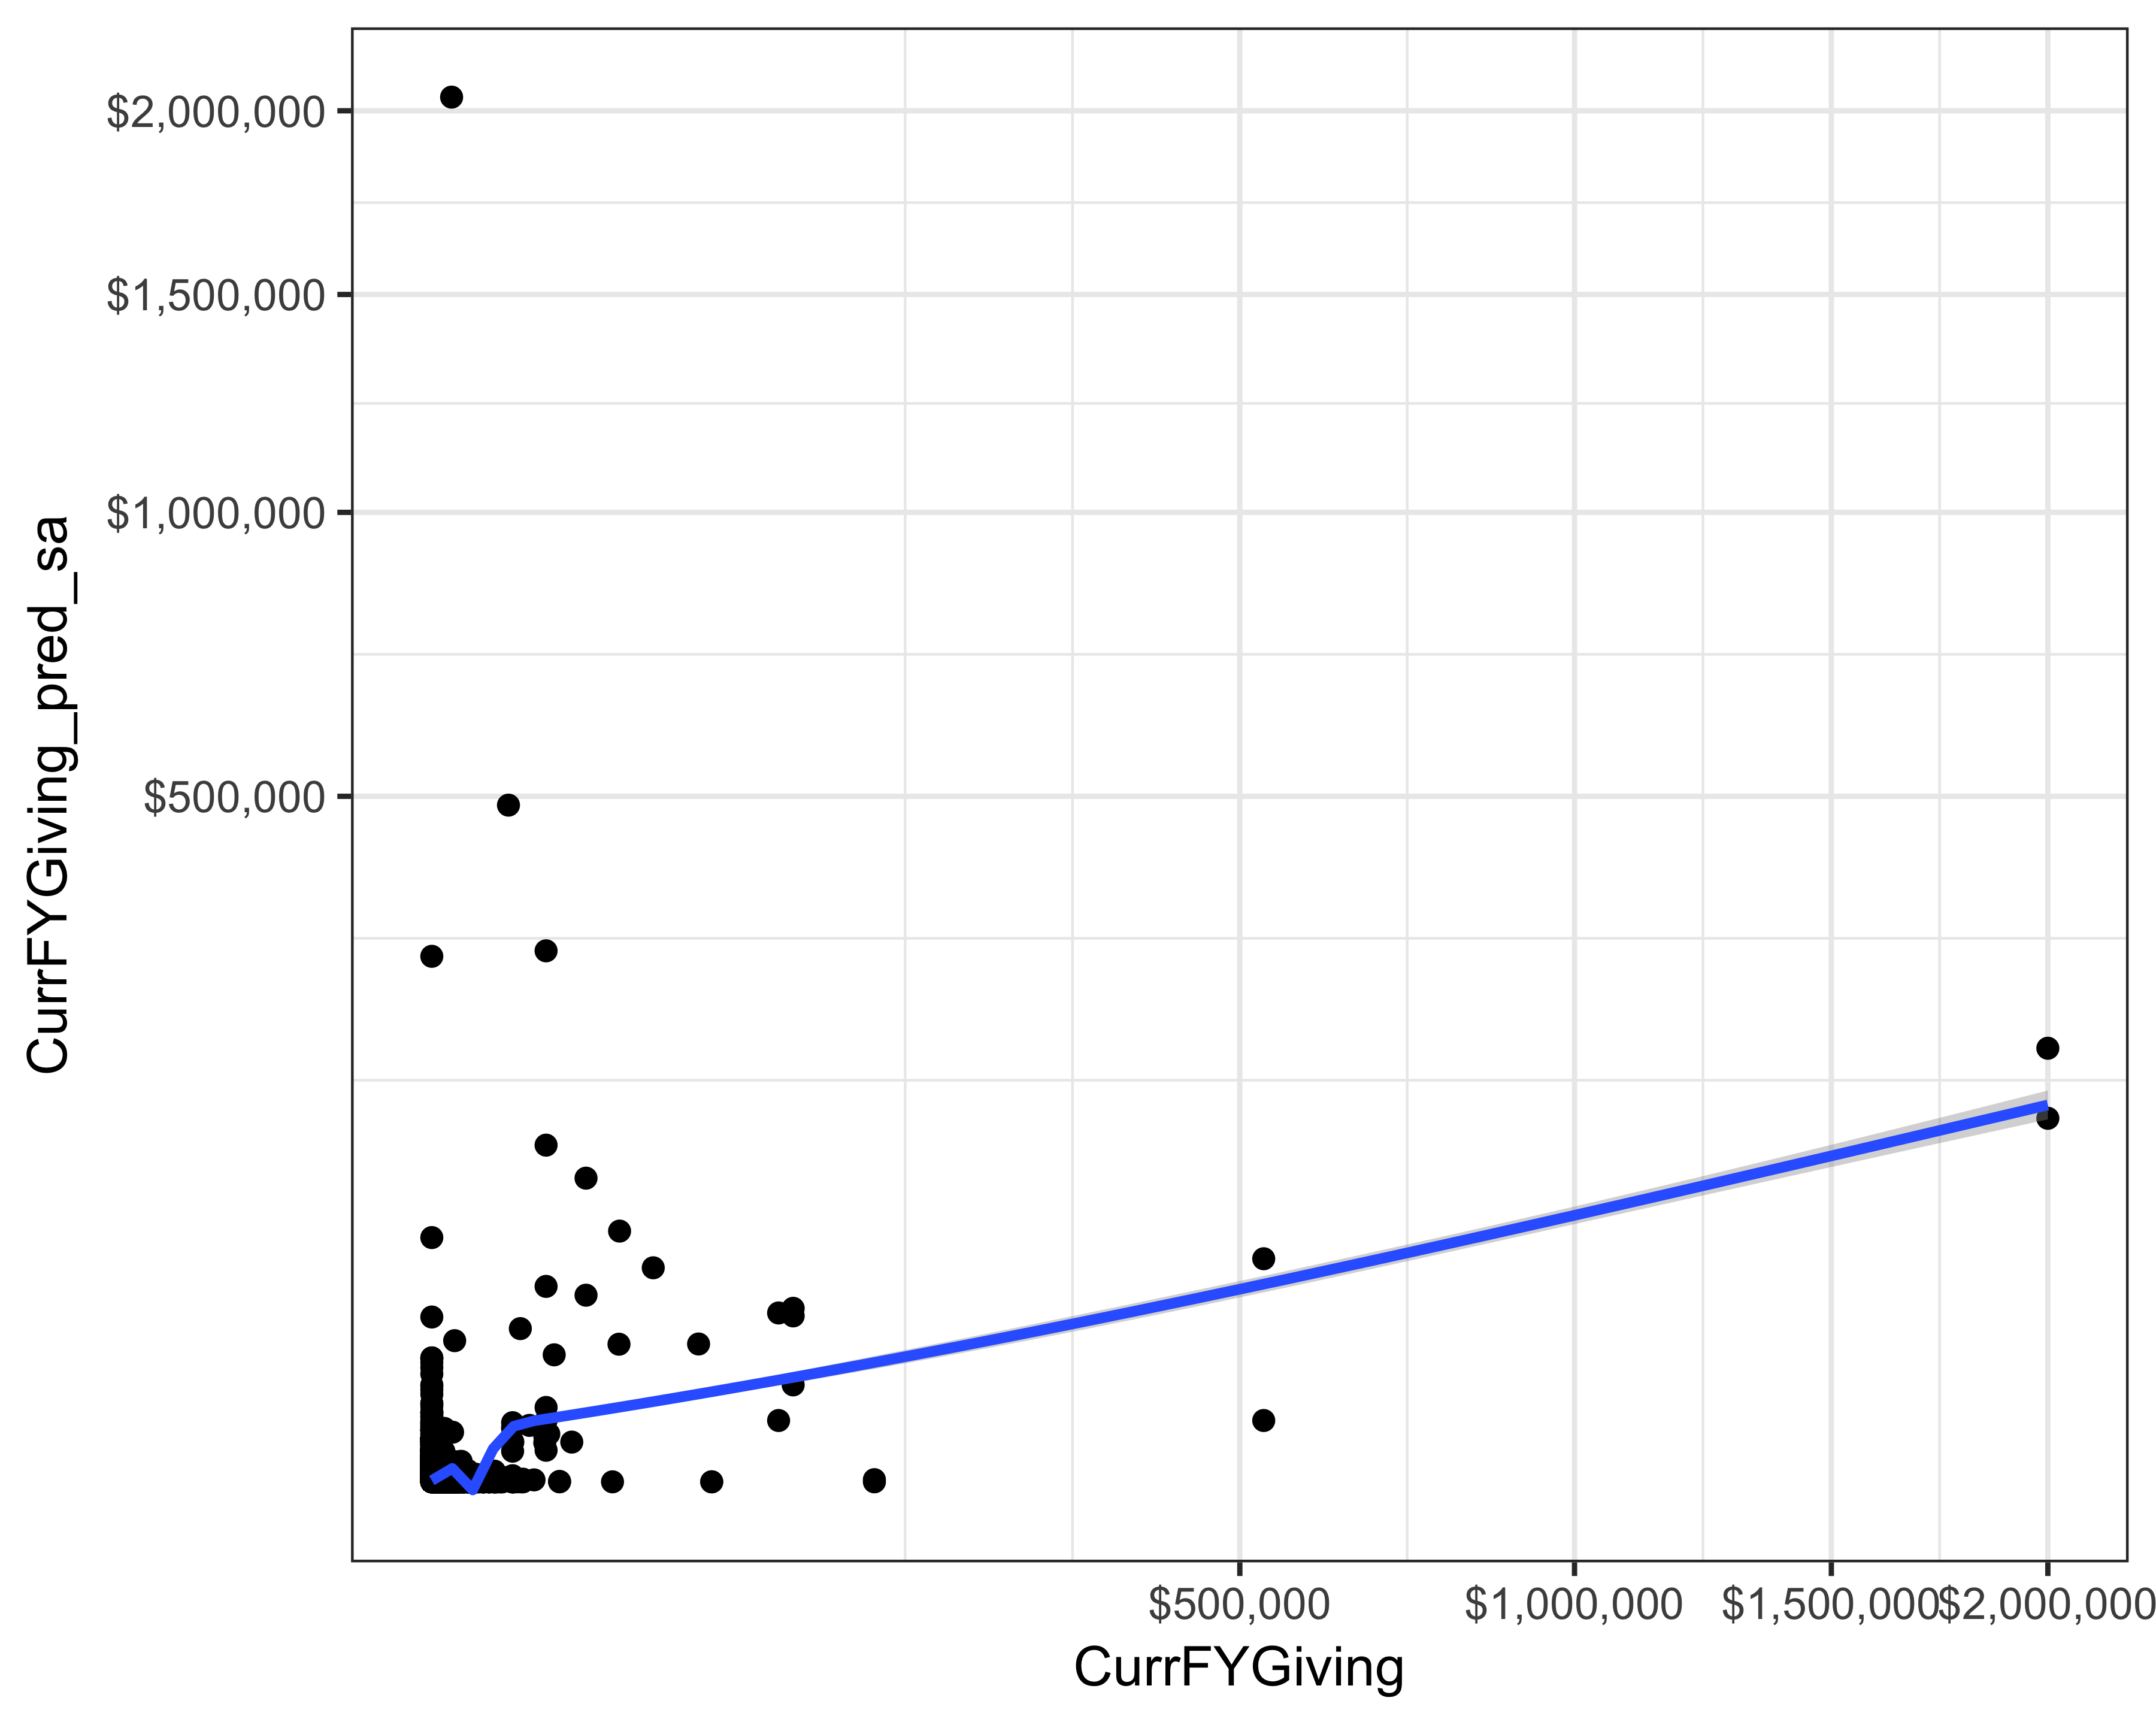 Actual versus prediction of current FY giving using simple average